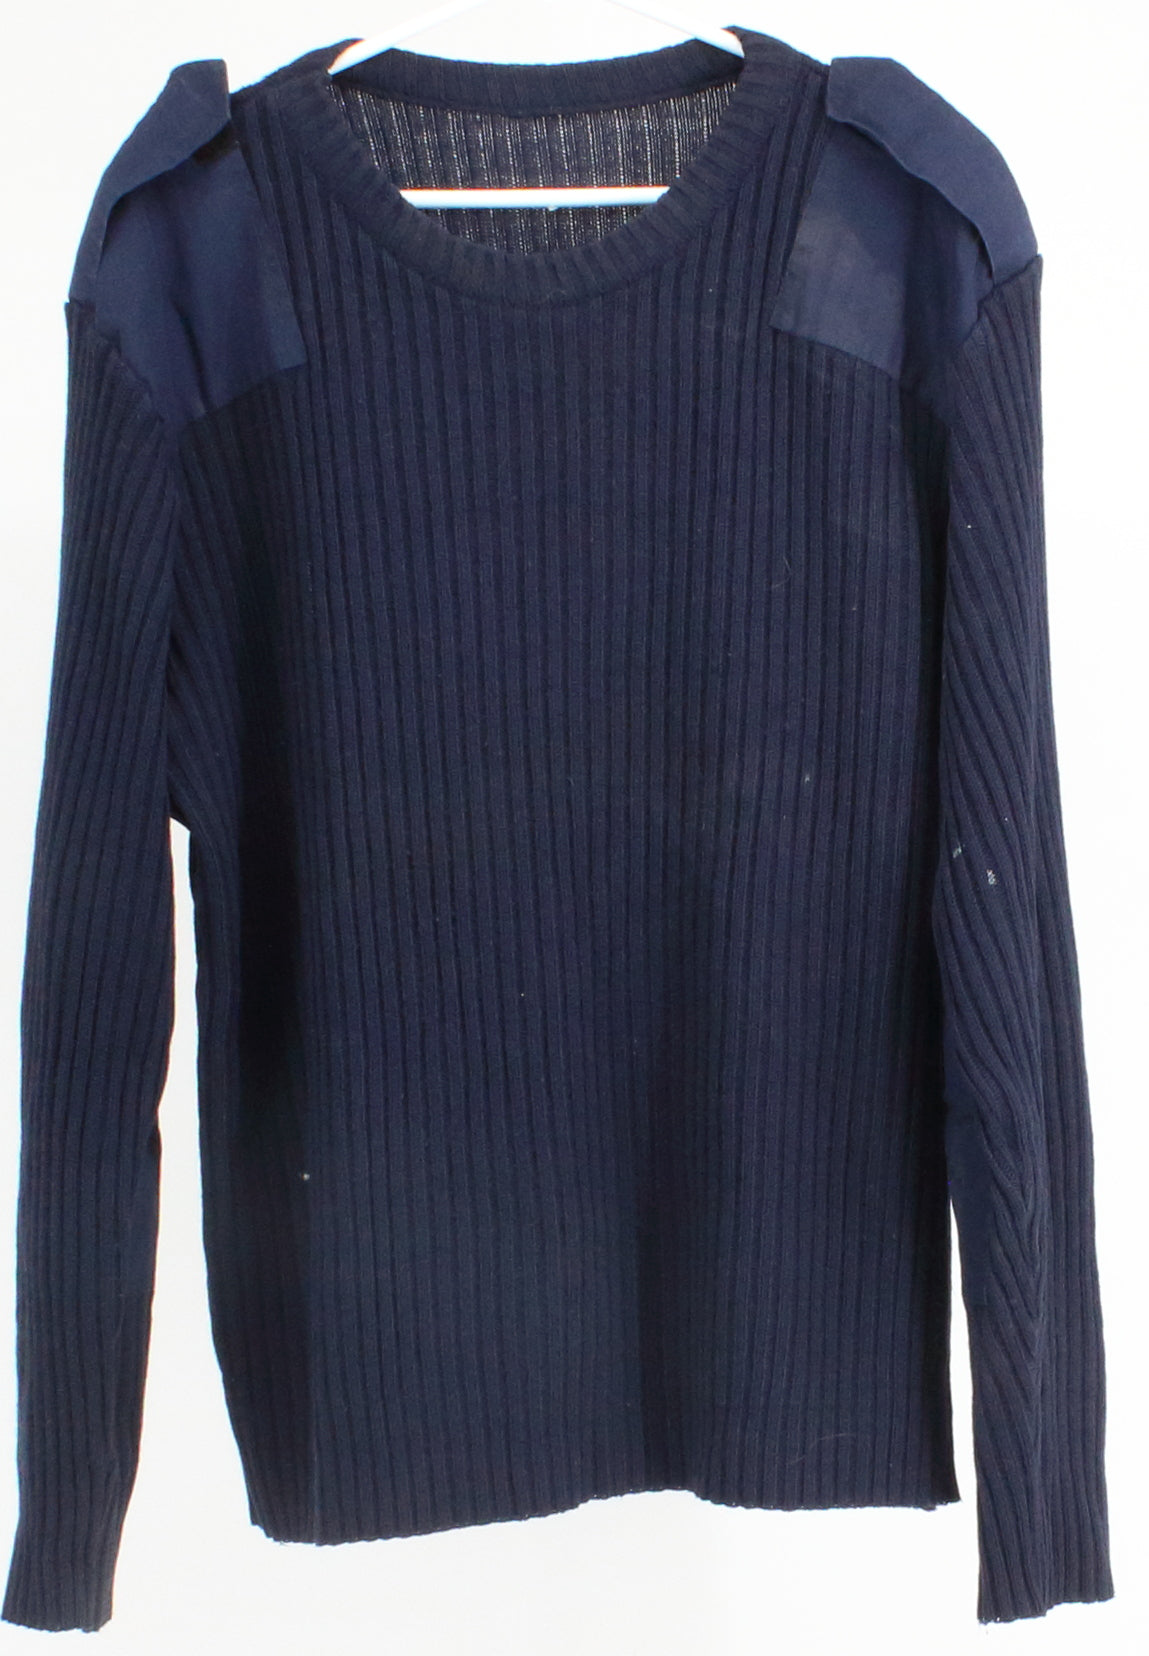 Navy Blue Plain Roundneck Knitted Sweater